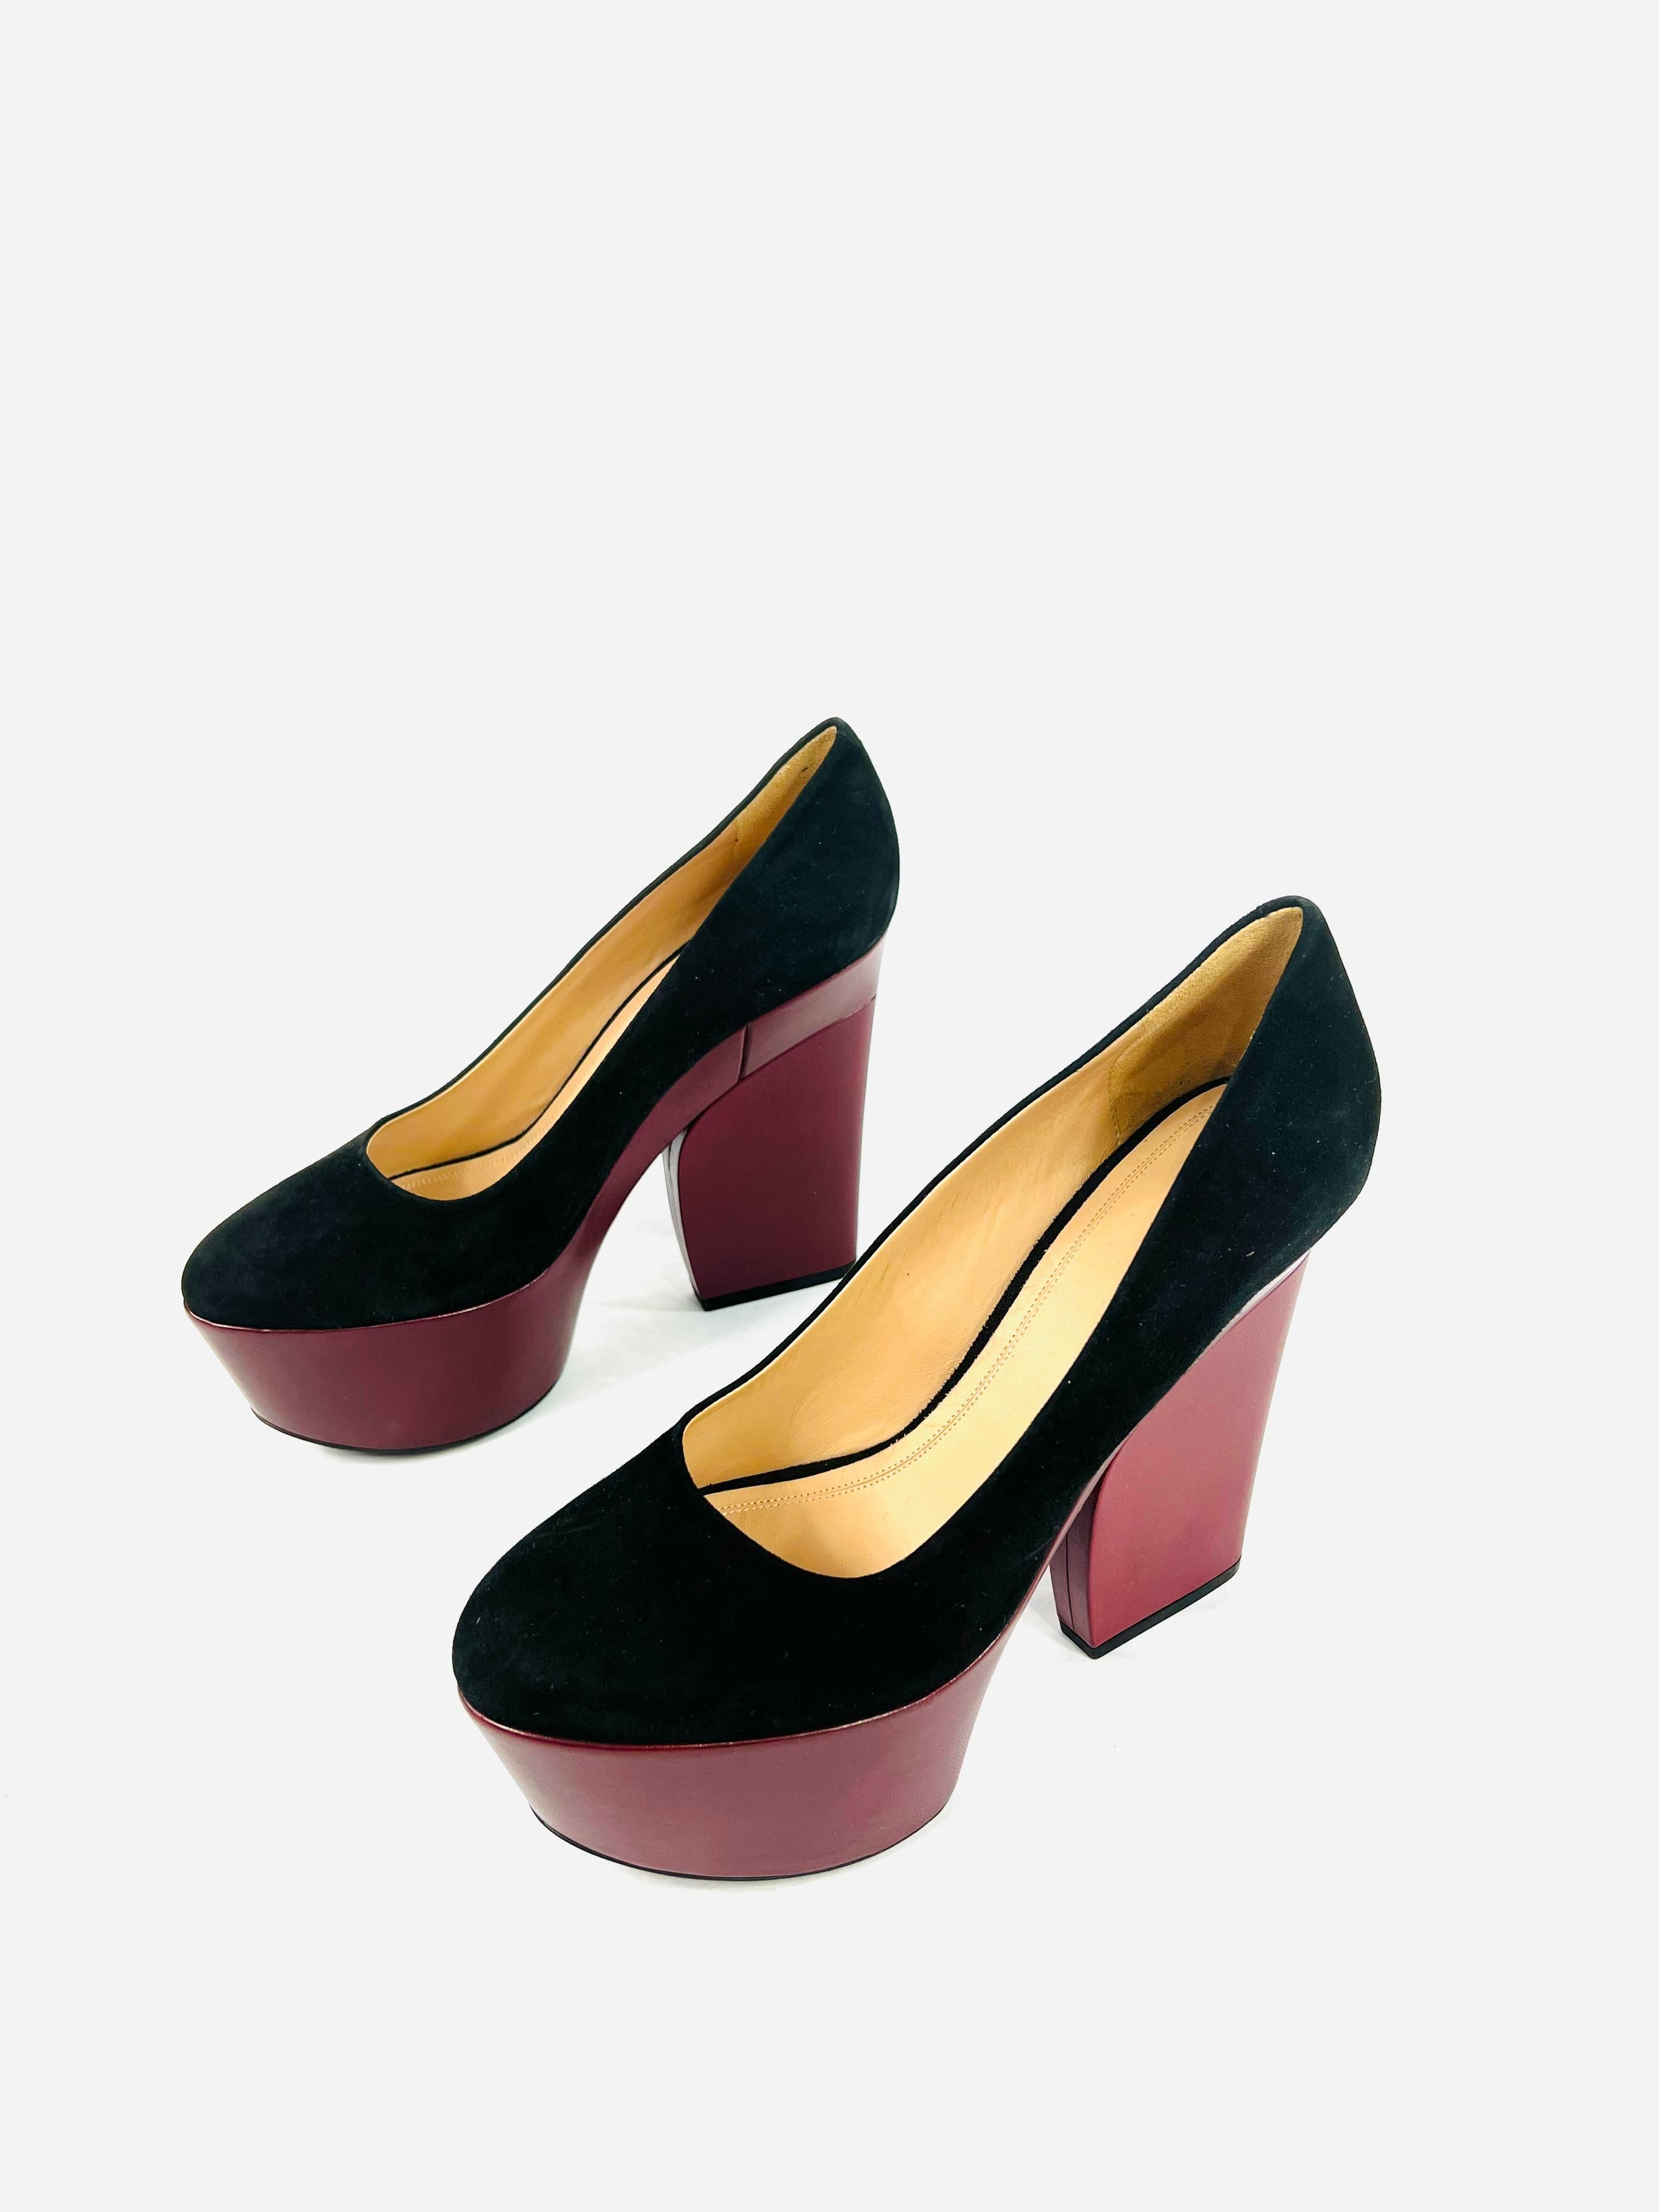 Product details:

The shoes are made out of black suede and burgundy leather, it features rounded toe and the heel heigh is 5.75.